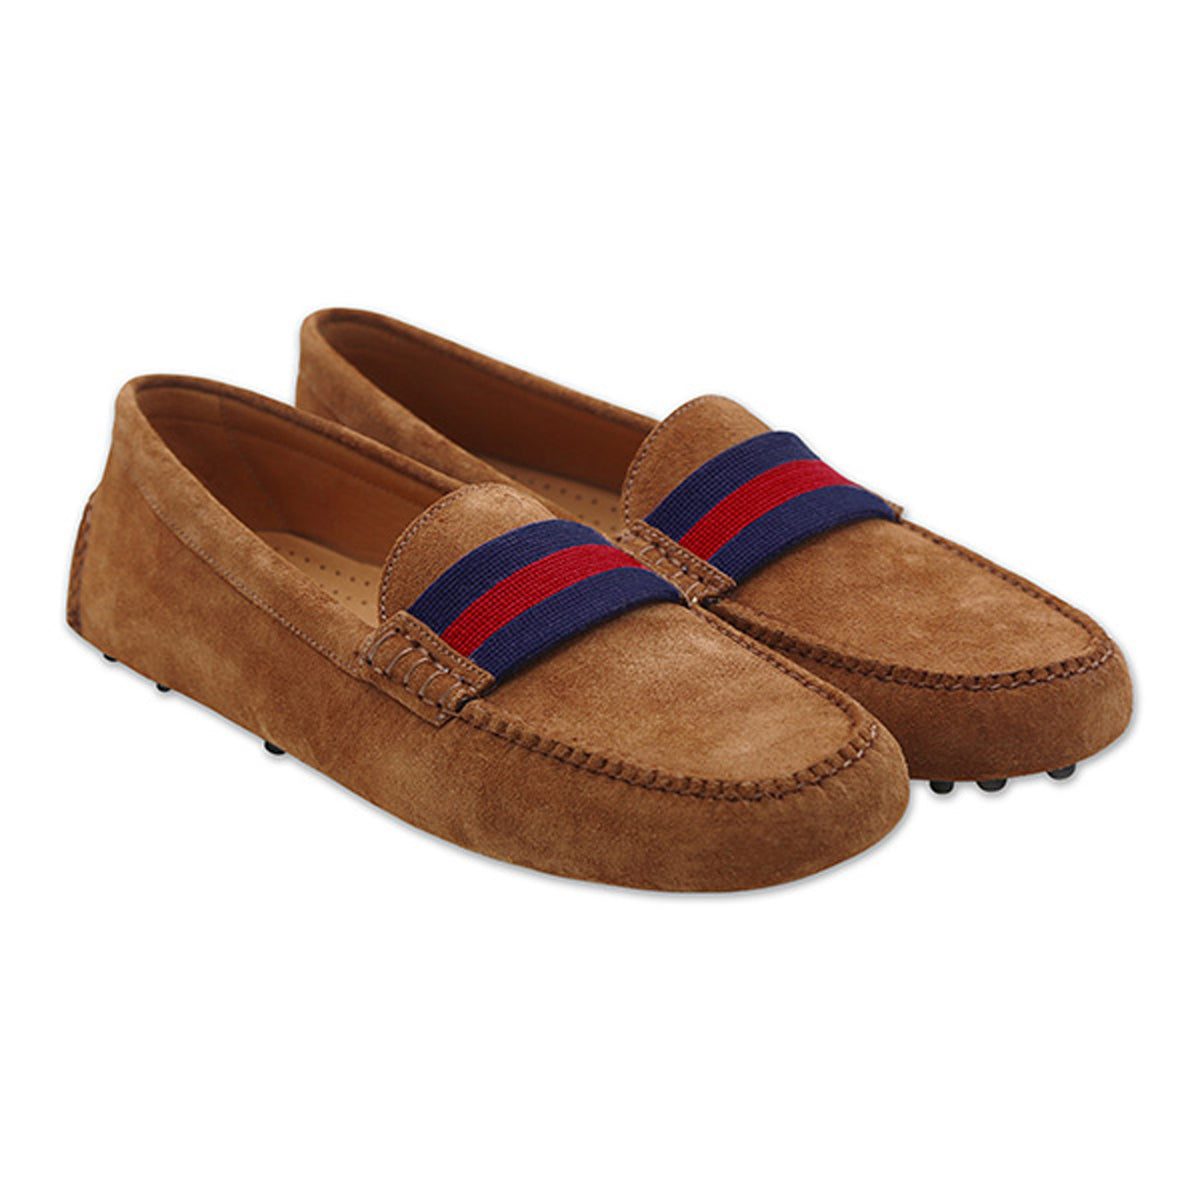 Navy & Red Surcingle Needlepoint Driving Shoe in Cognac Suede by Smathers & Branson - Country Club Prep